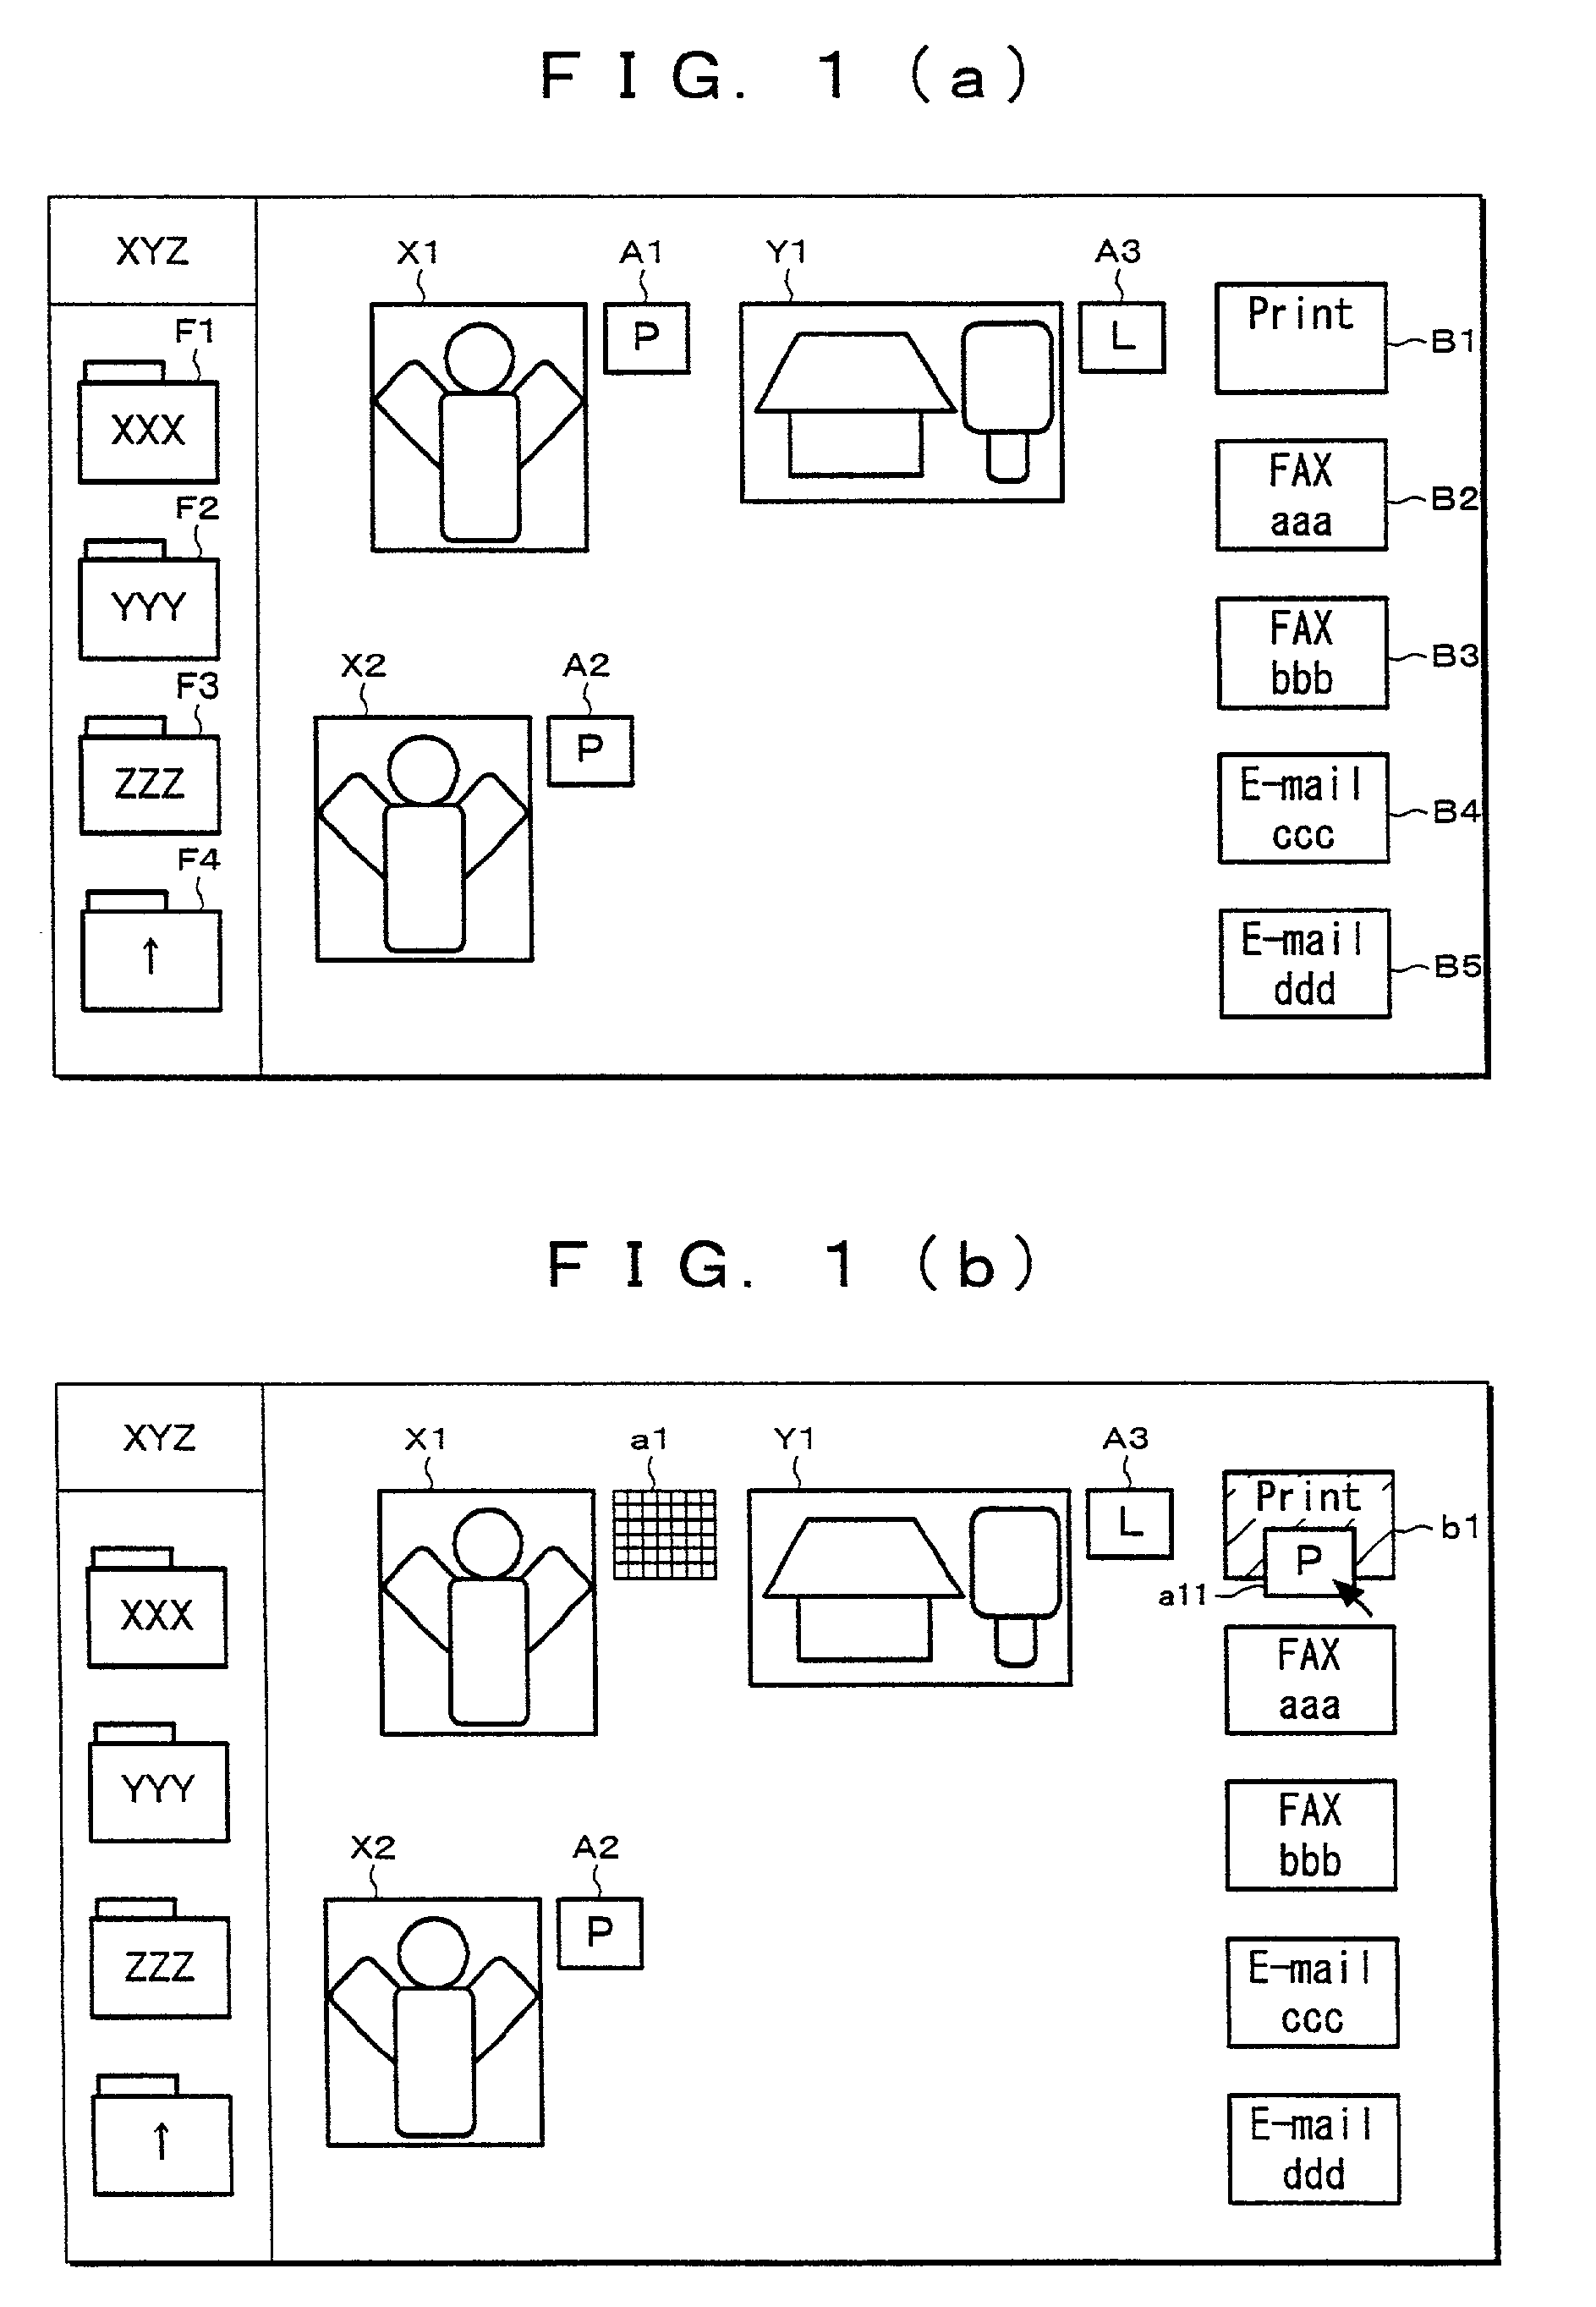 Operation method for processing data file